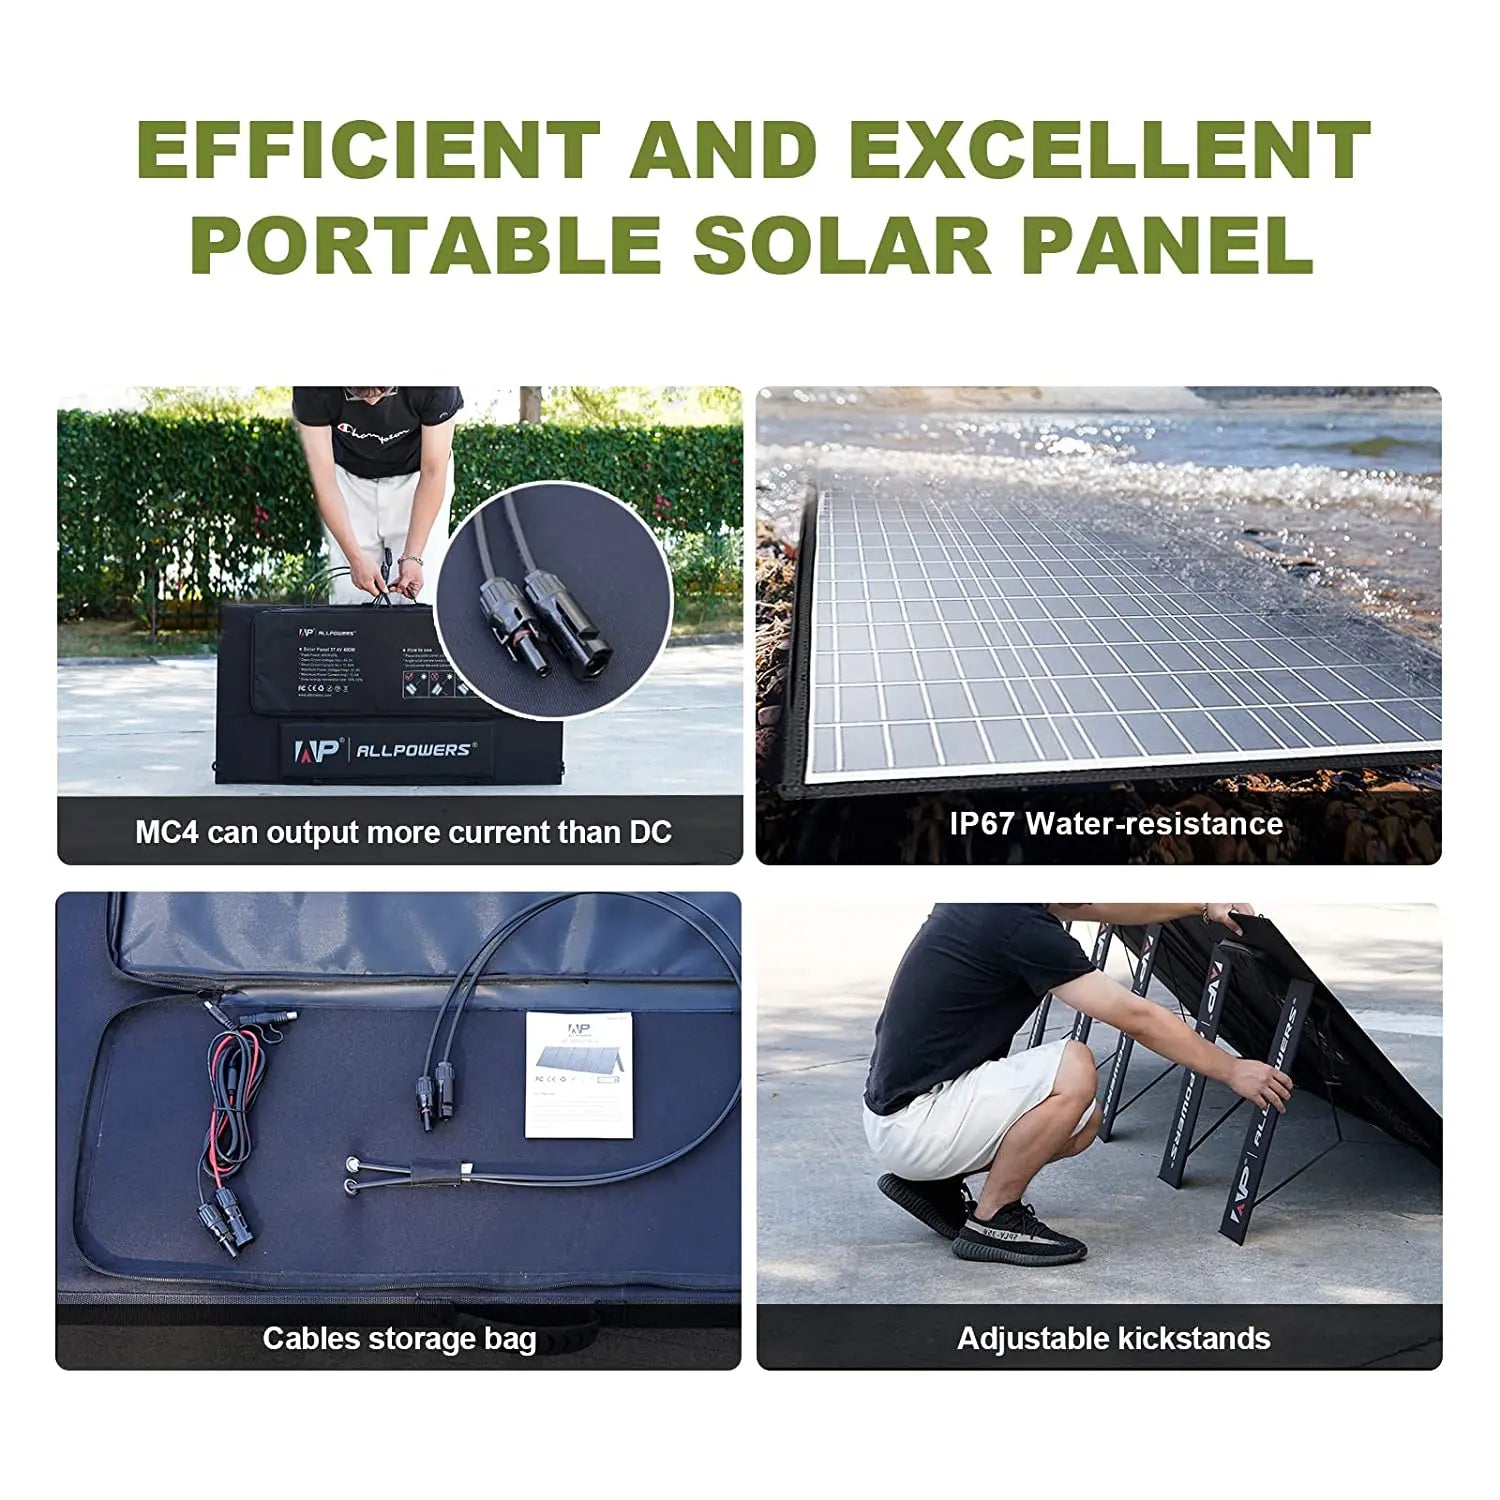 ALLPOWERS Foldable Solar Panel, Portable solar panel with MC4 output, water-resistant cables, adjustable stands, and carry bag.